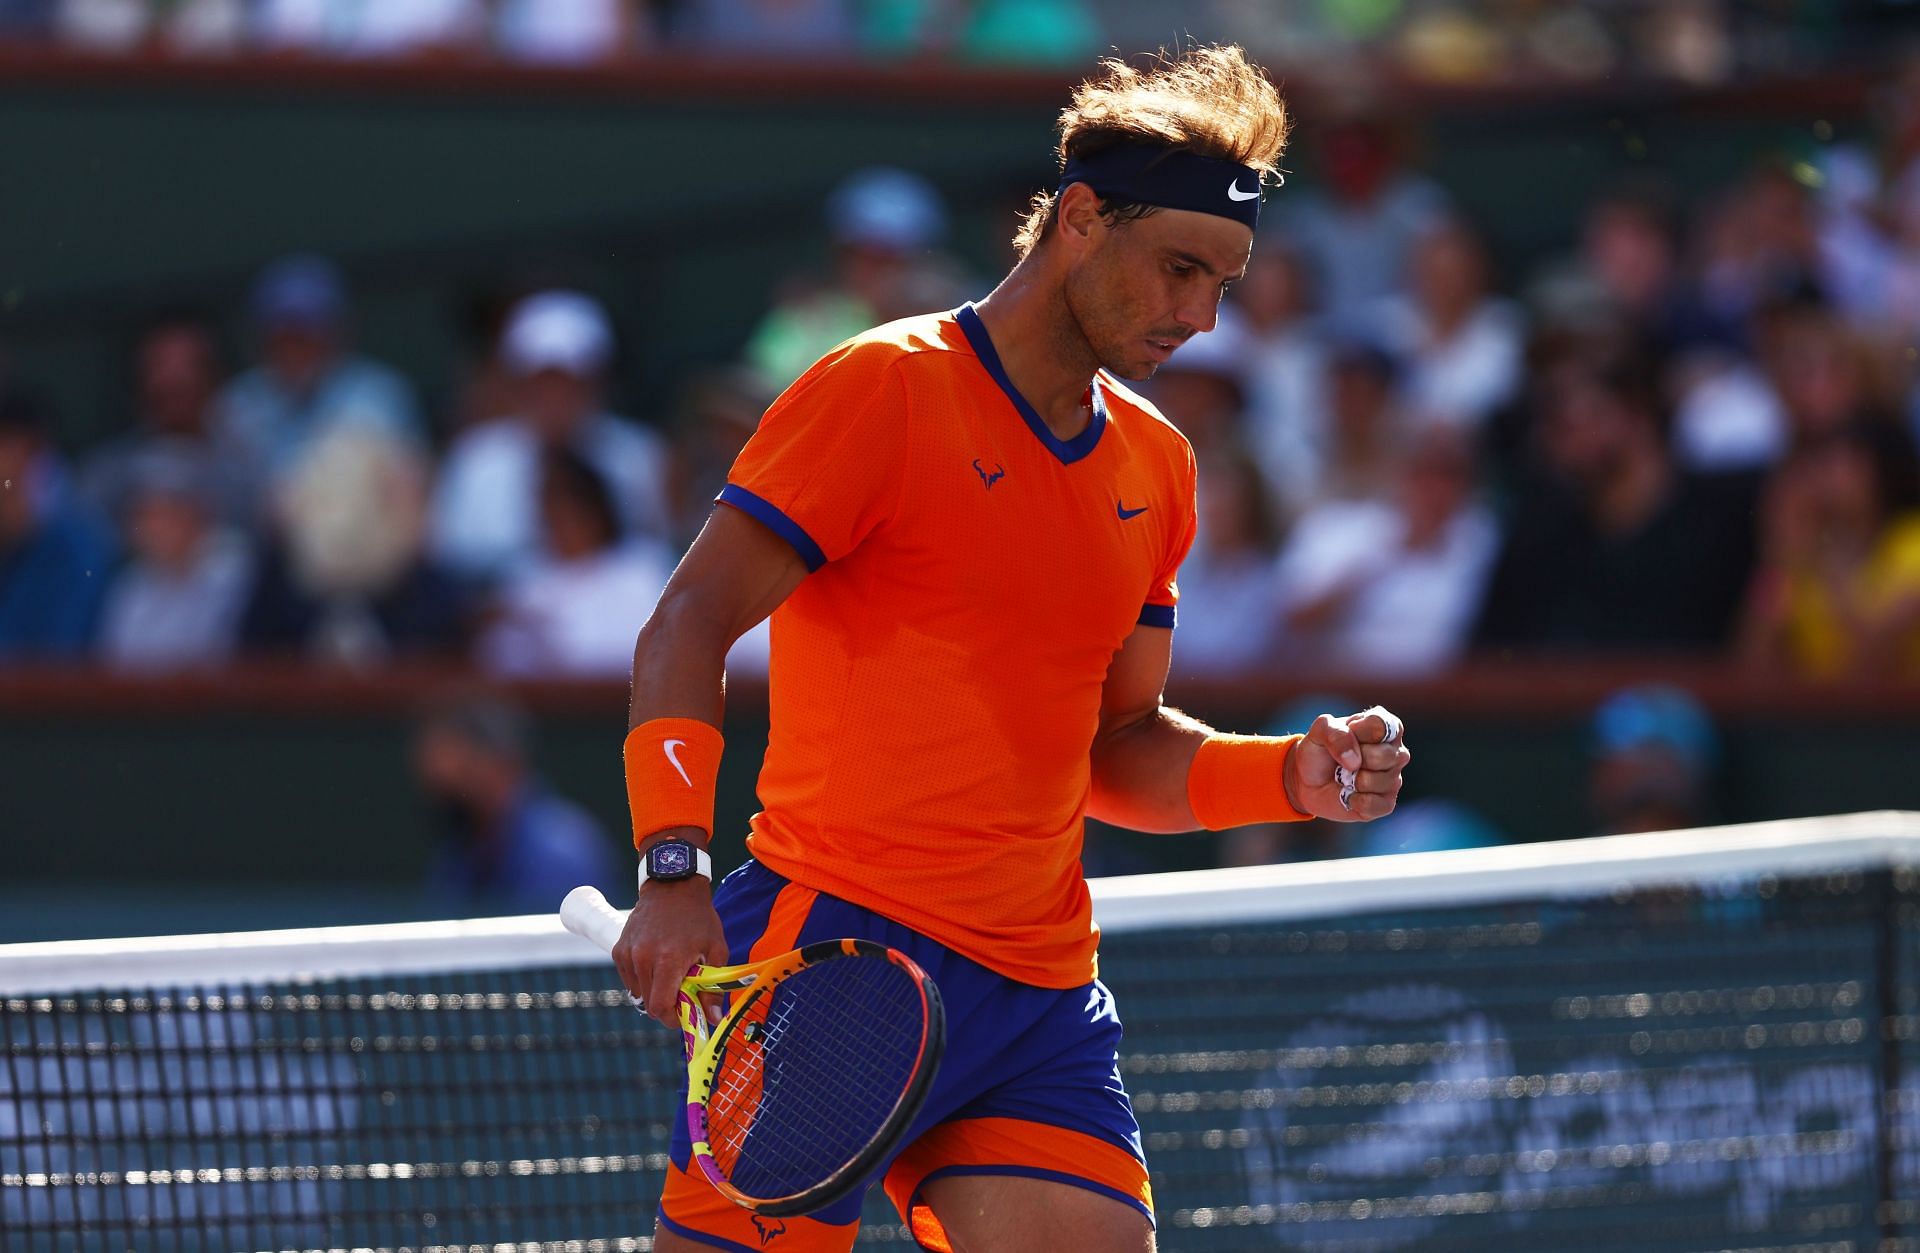 Rafael Nadal was last seen in action at the 2022 BNP Paribas Open